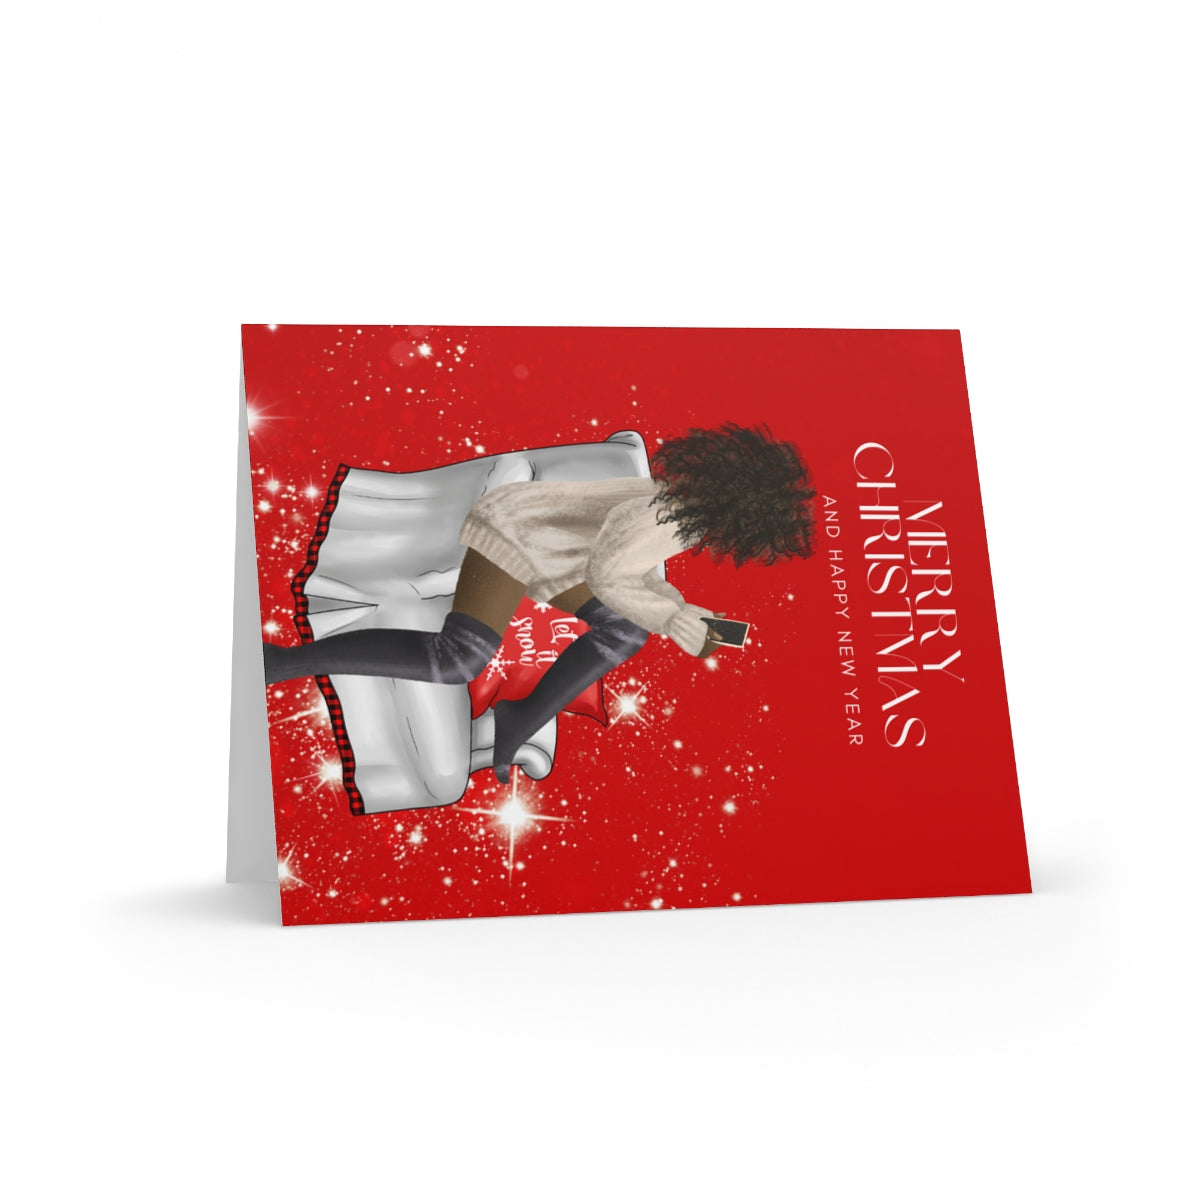 Merry Christmas Greeting cards| Black Girl Holiday Cards